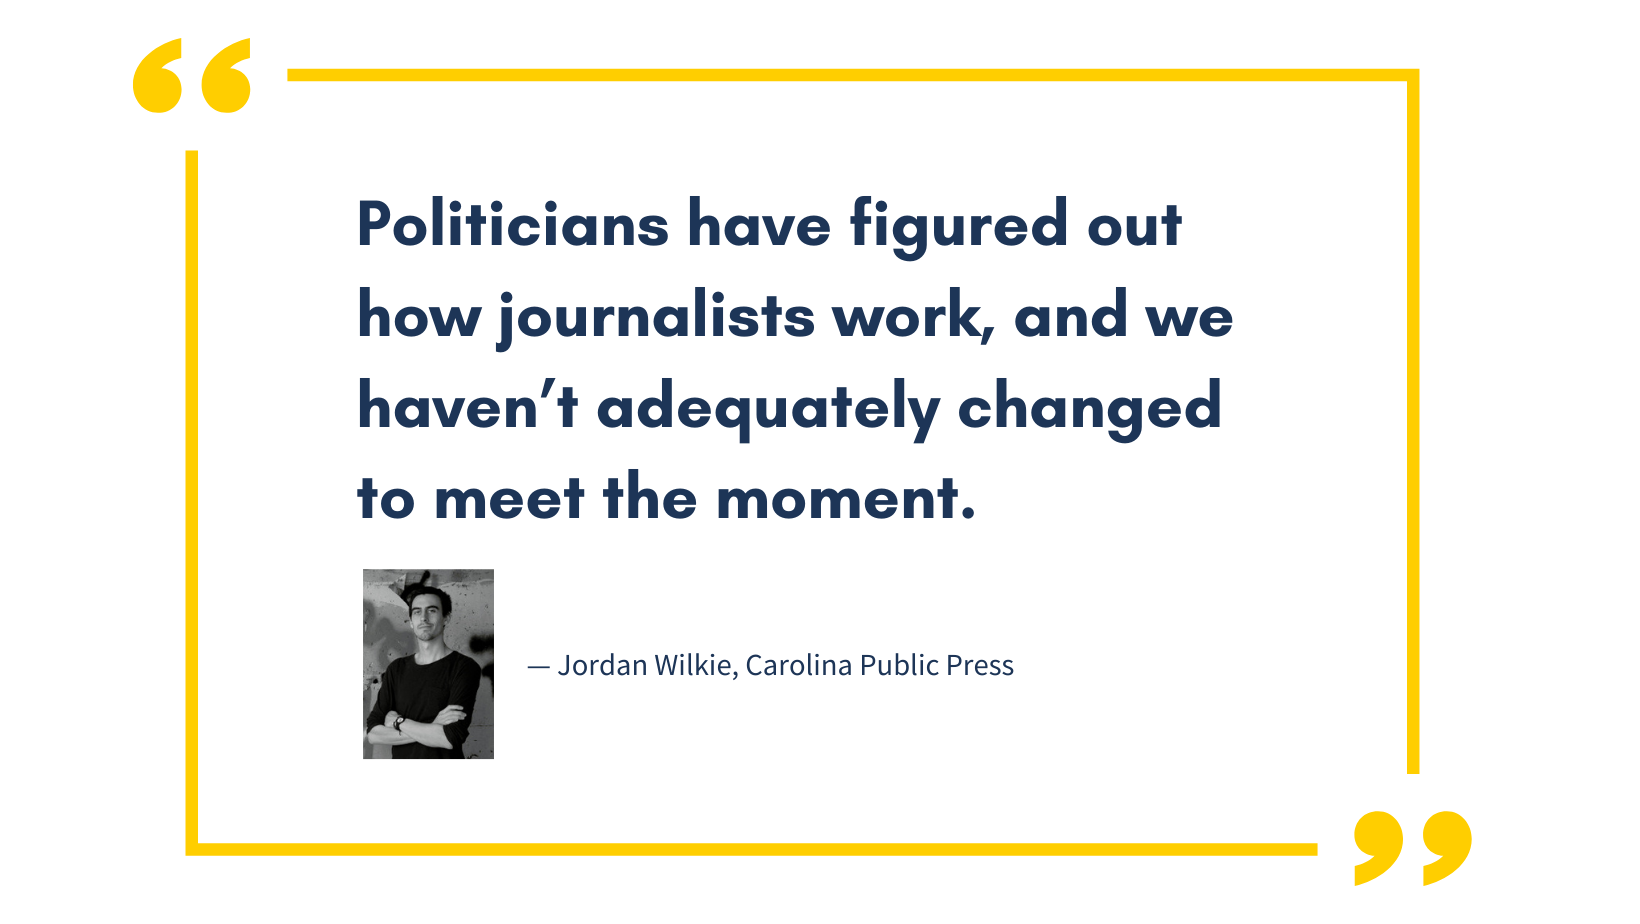 Politicians have figured out how journalists work, and we haven’t adequately changed to meet the moment.”